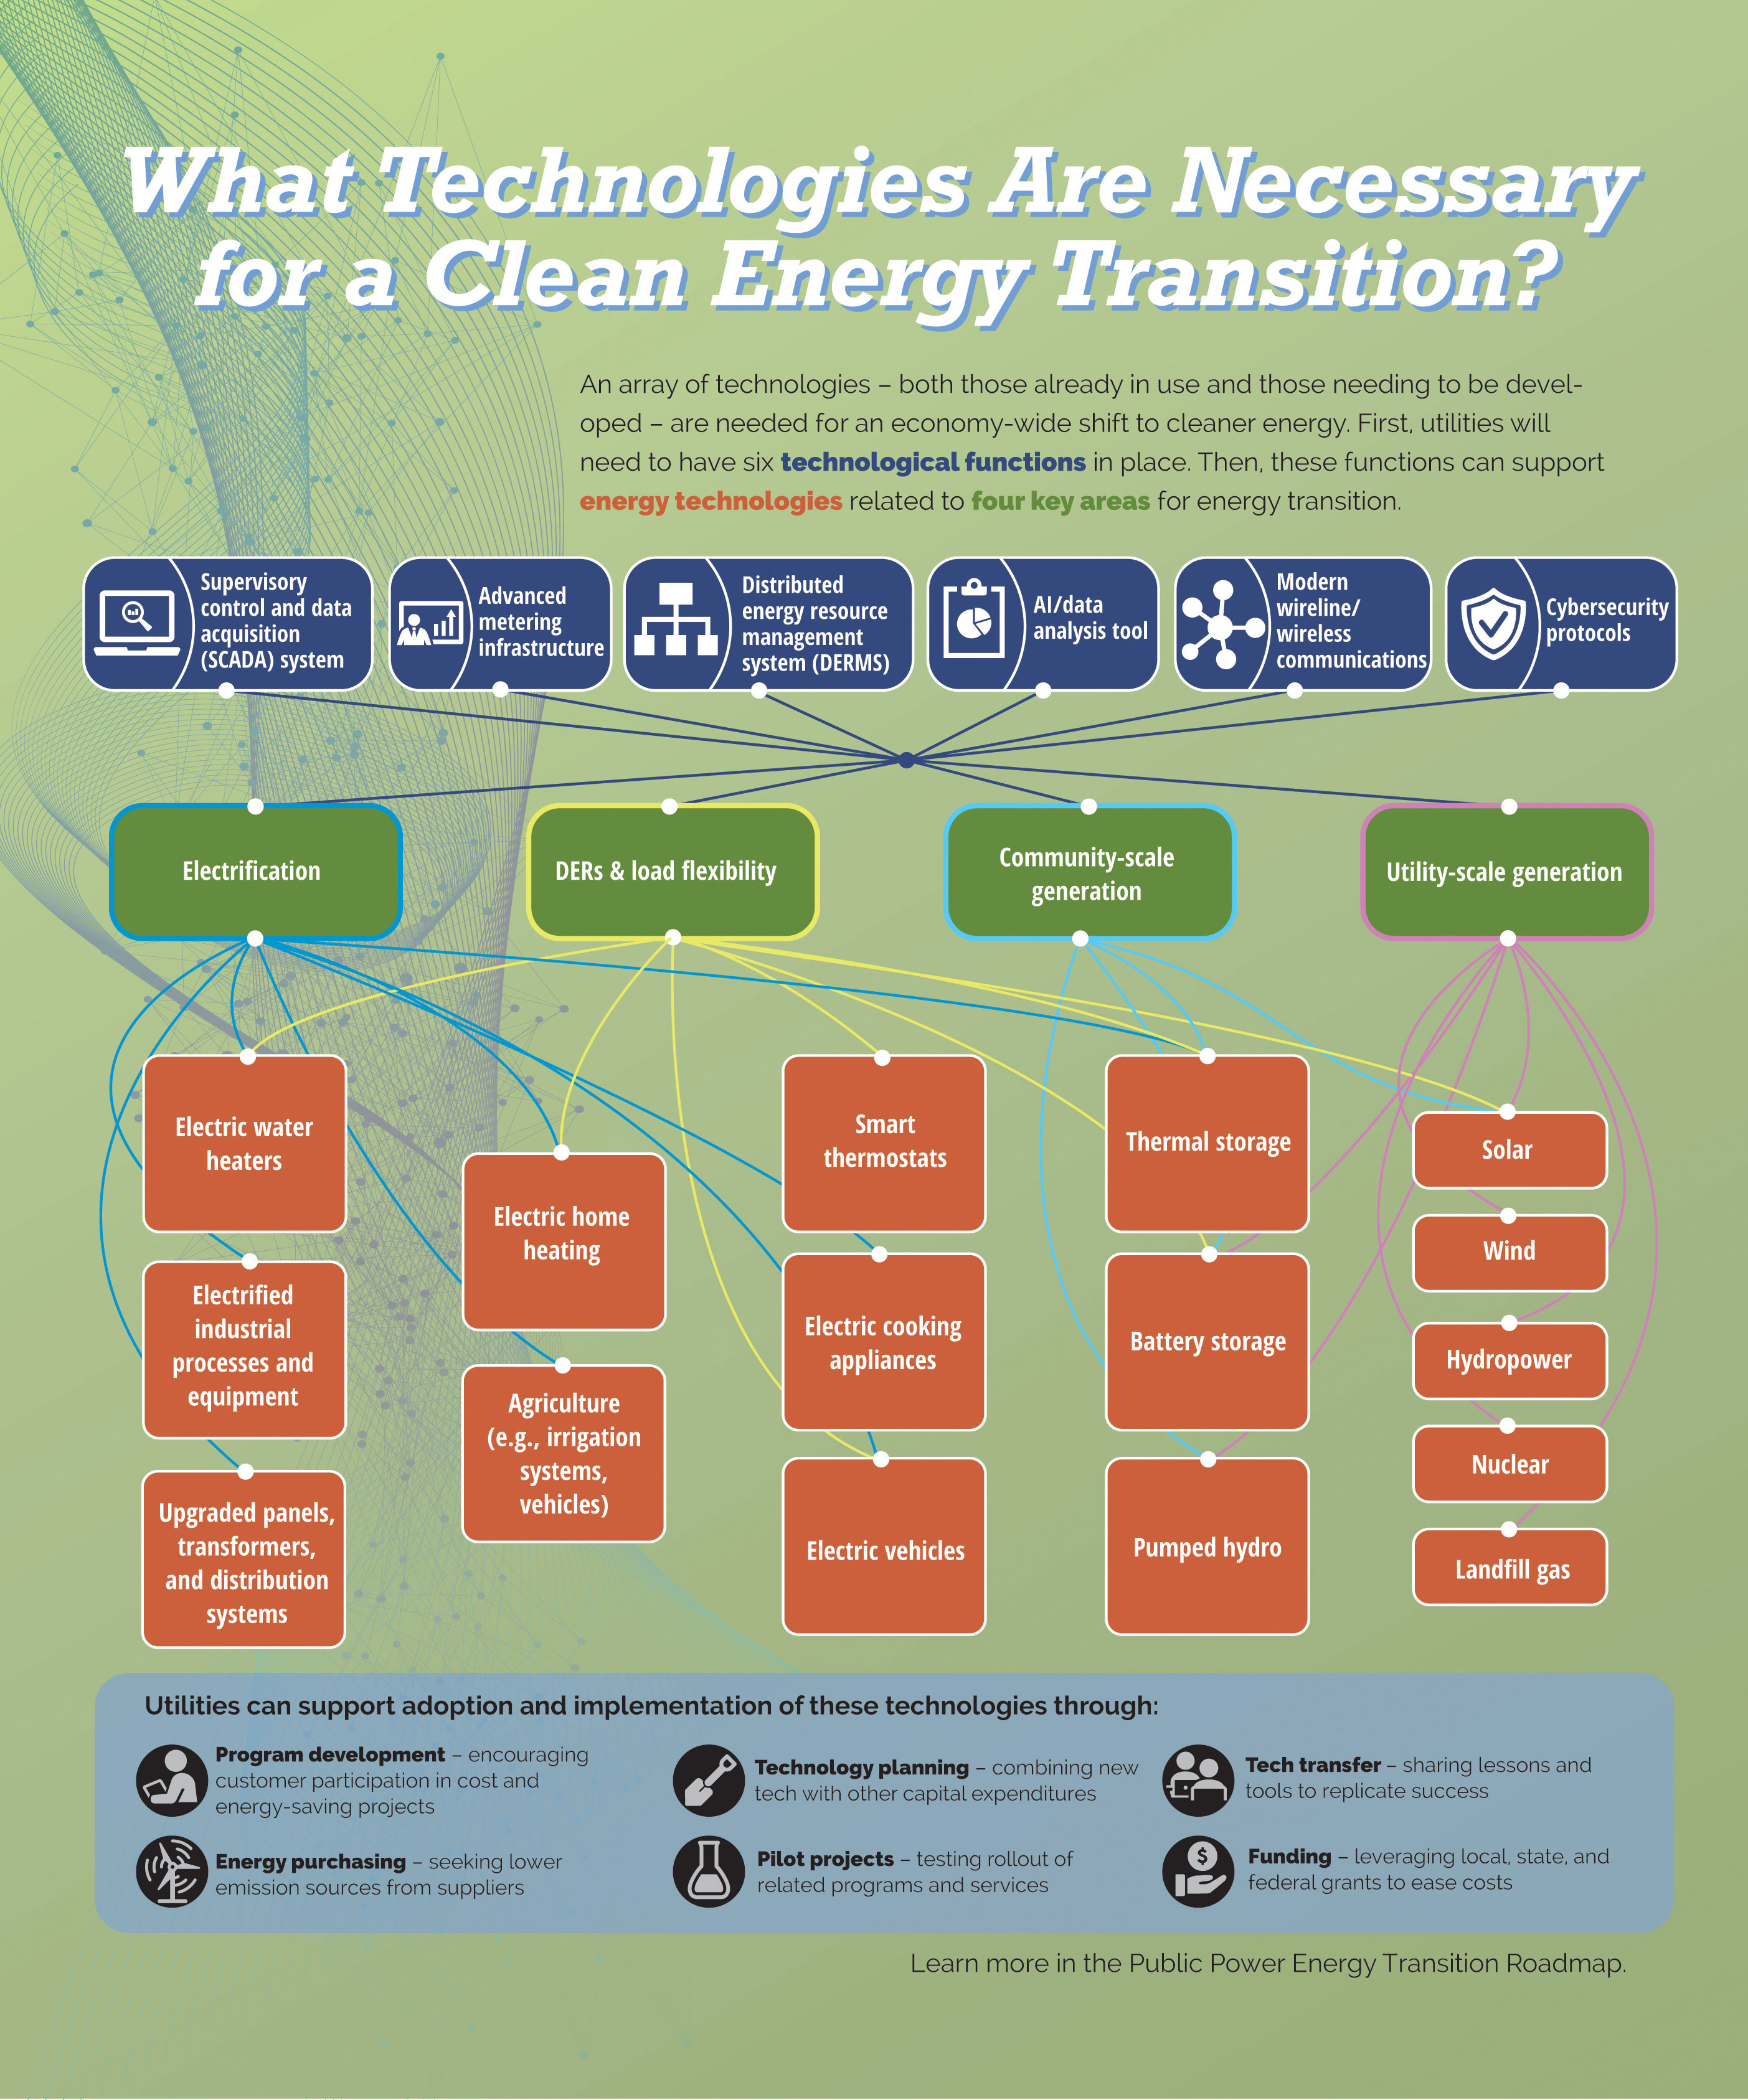 Technologies for an Energy Transition graphic